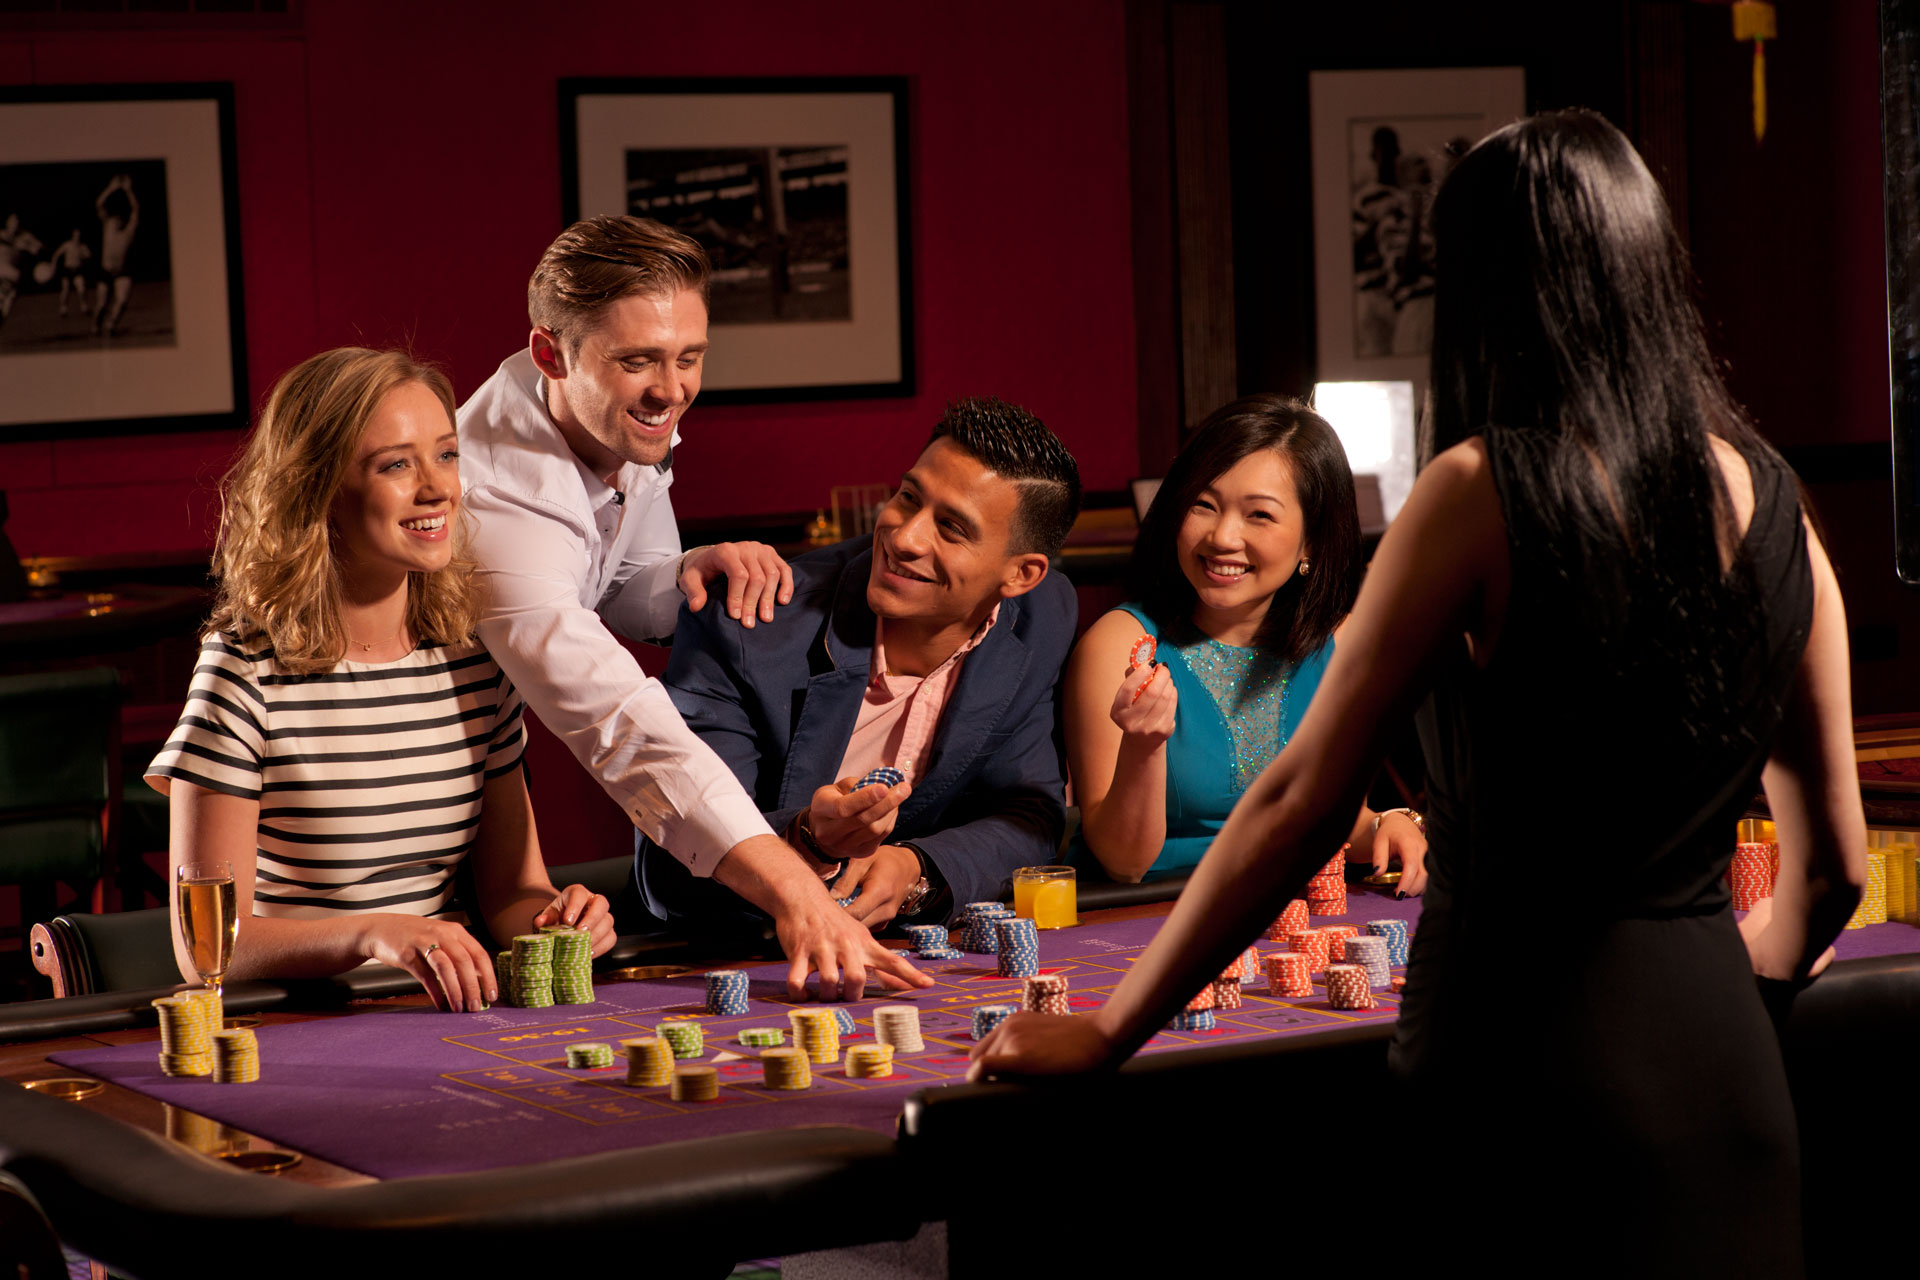 Know how slot games at online casinos attract more people